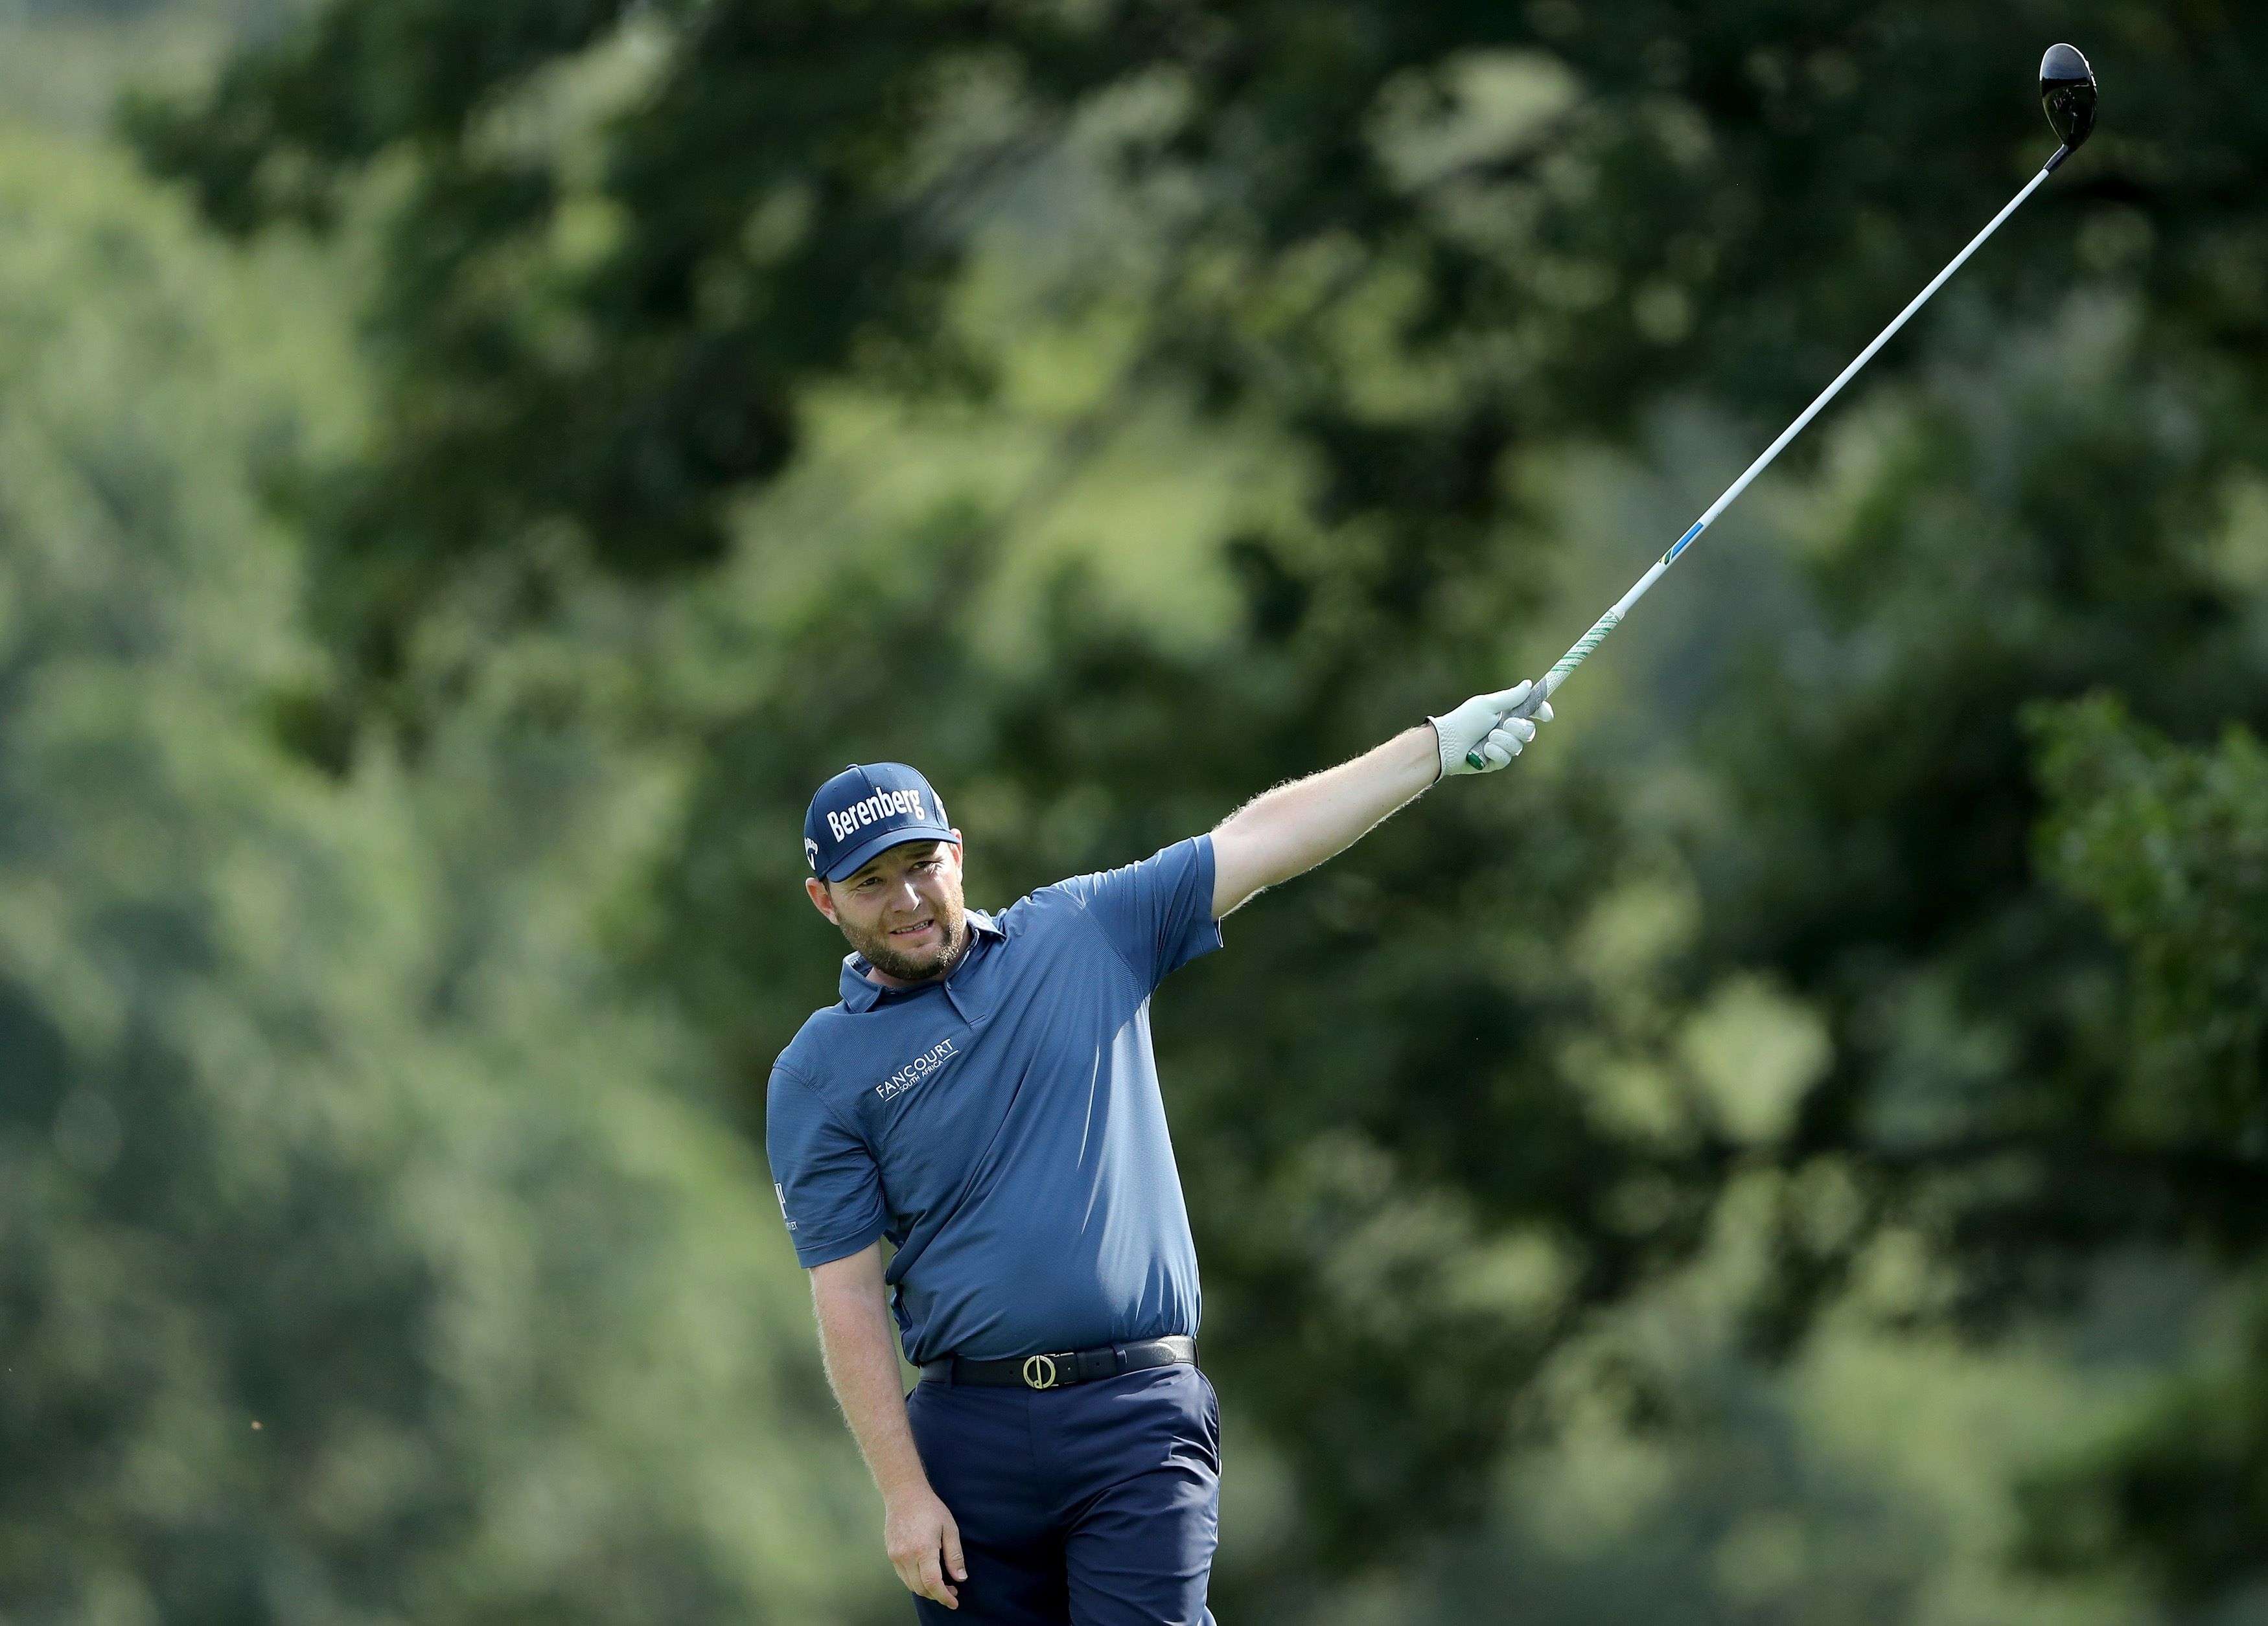 South African Branden Grace in action during The Barclays on the PGA Tour FedExCup play-offs. Photo: AFP